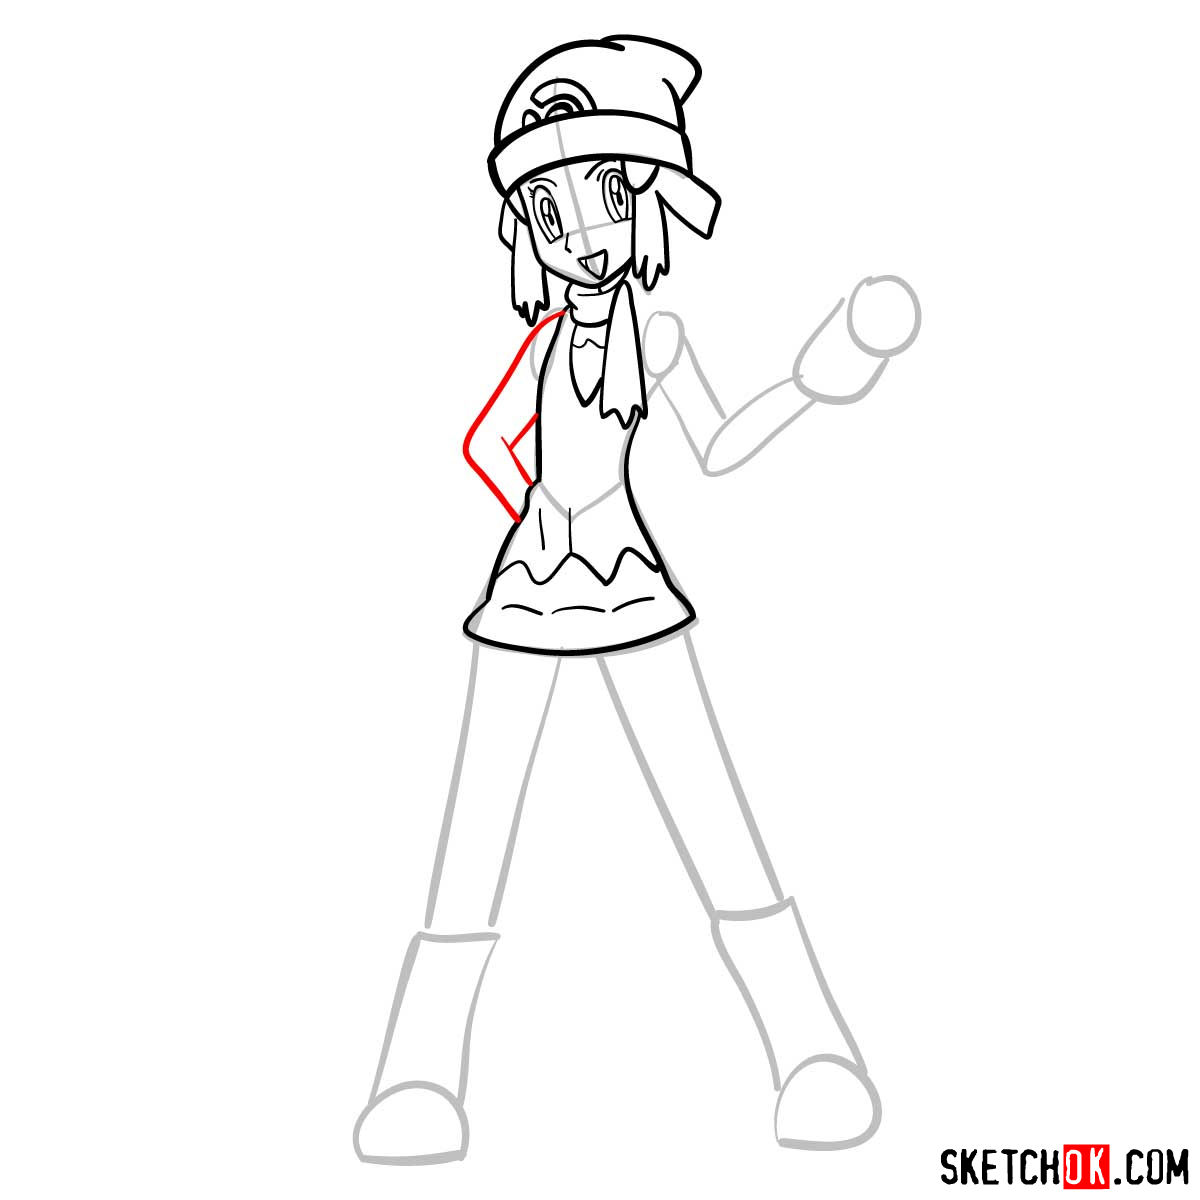 How to draw Dawn from Pokemon anime - step 10